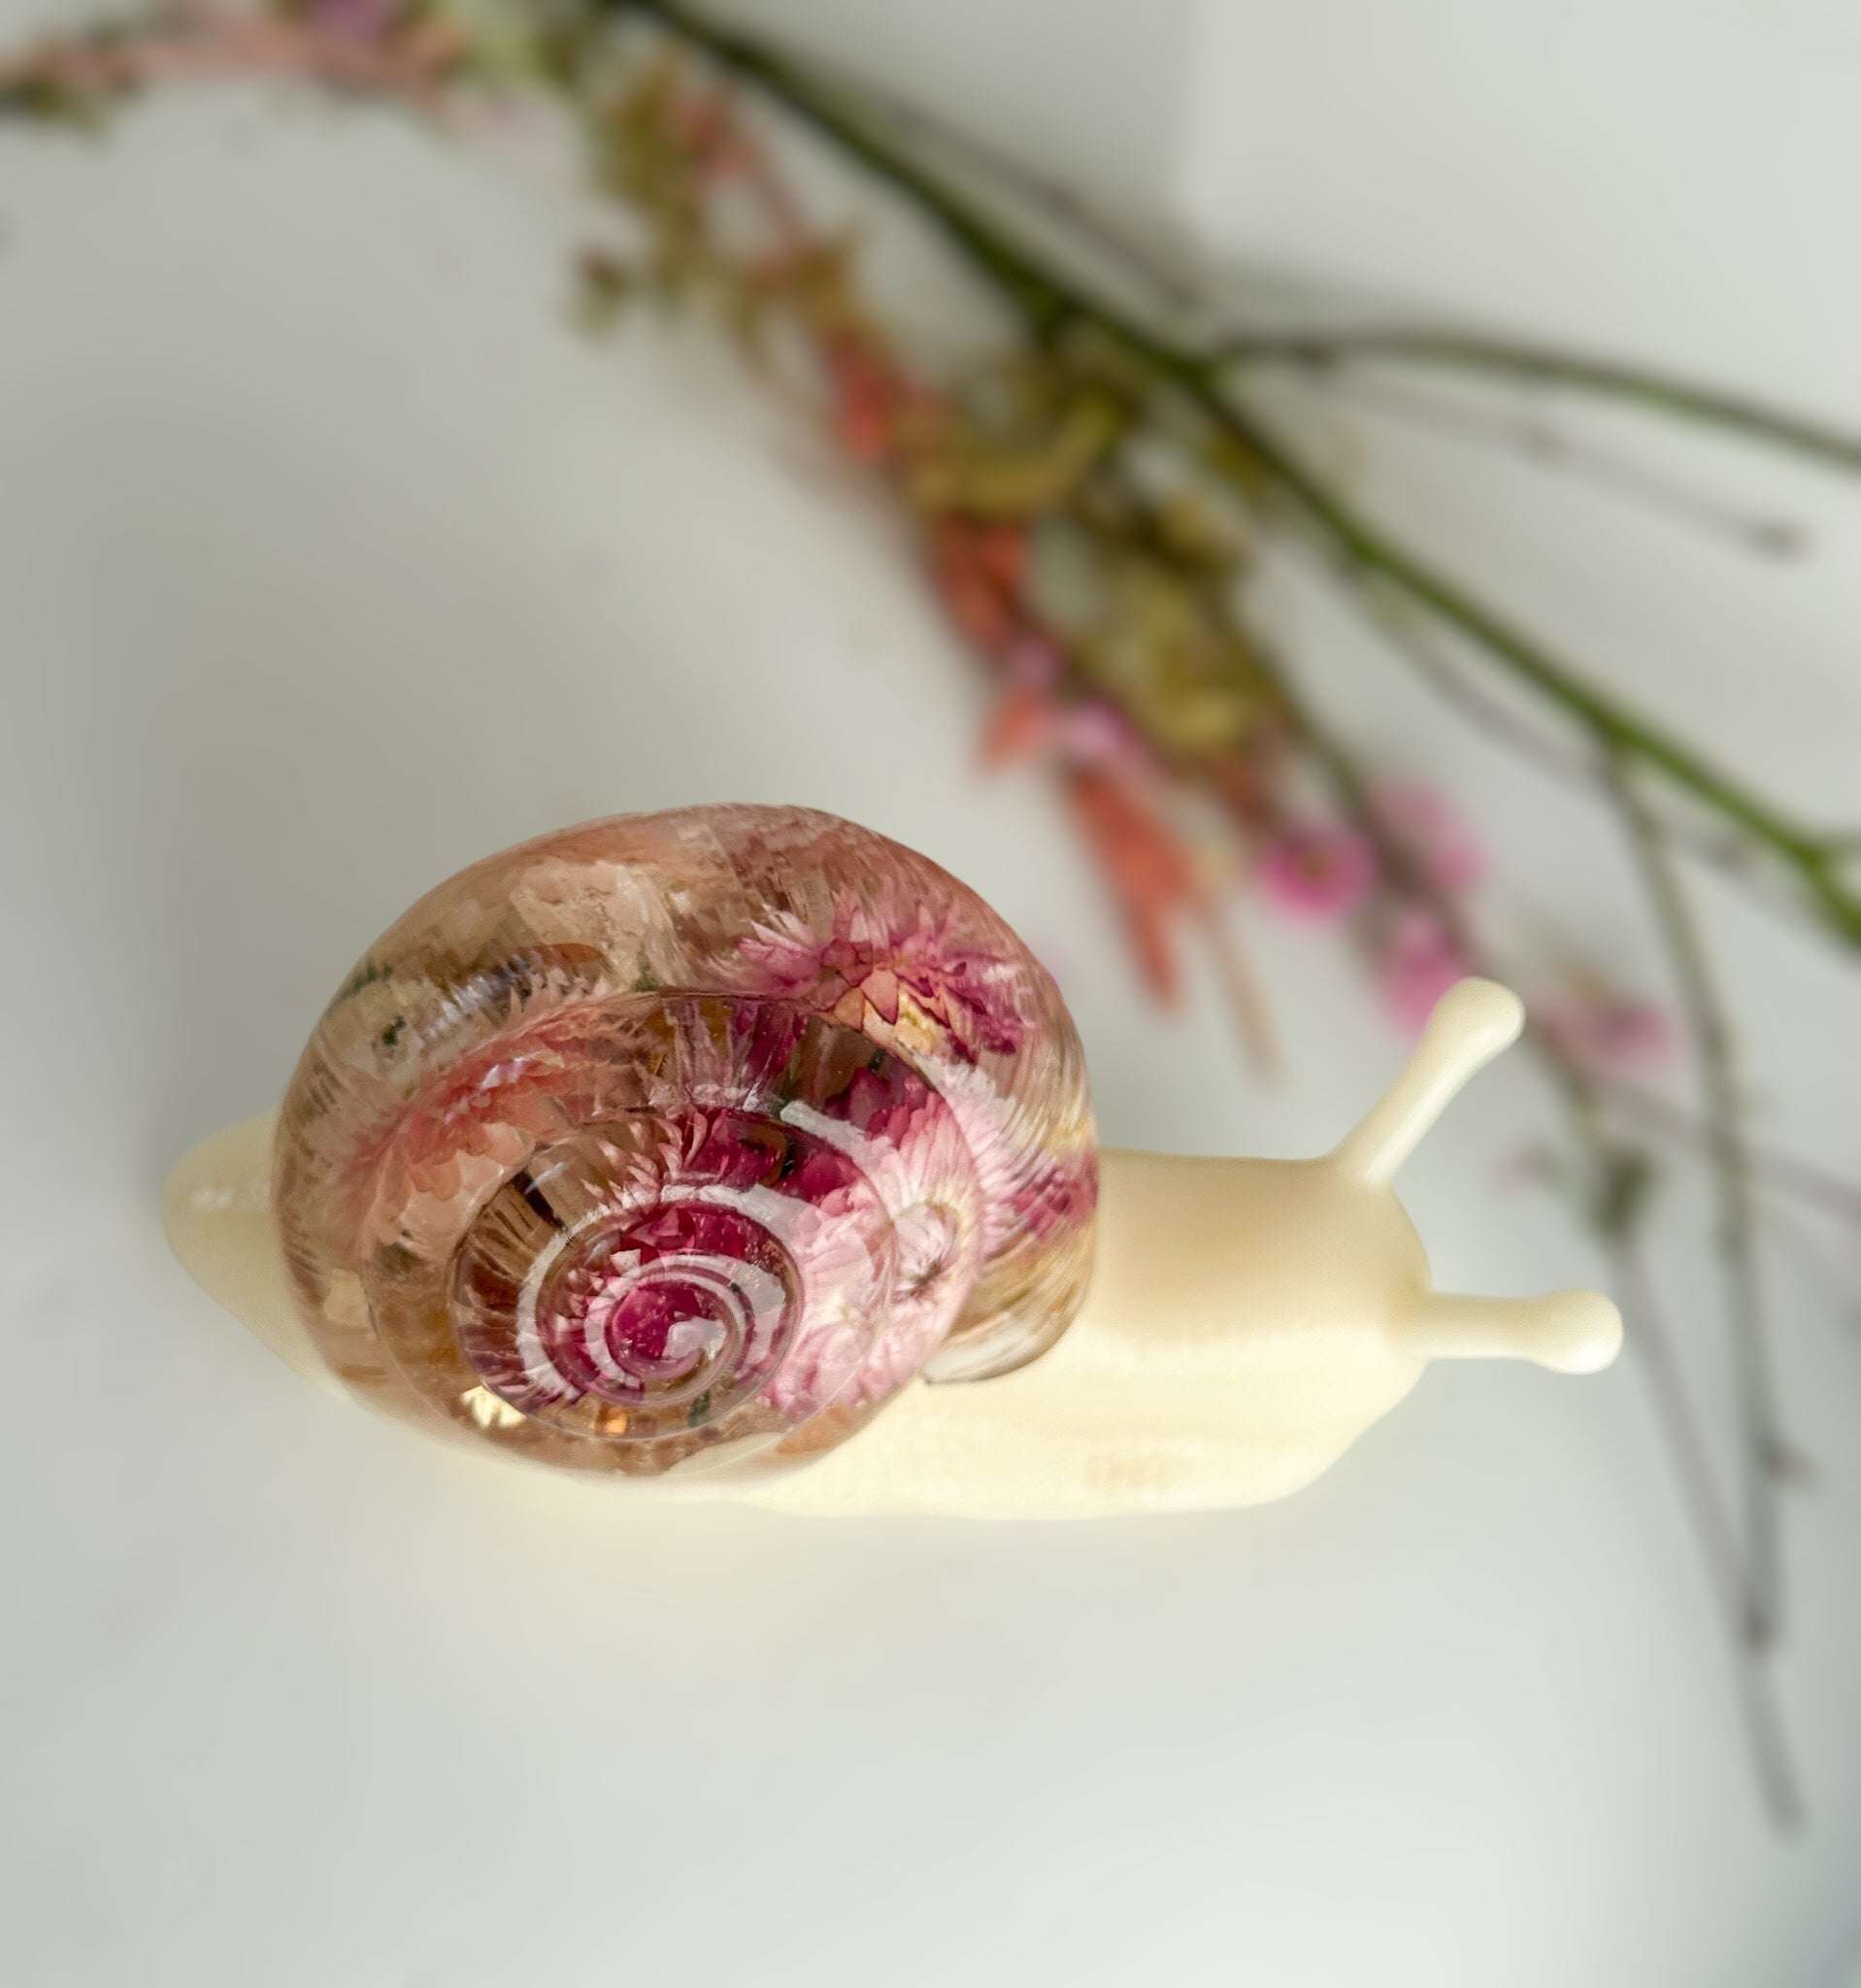 Whimsical Snail - Blossom the Pink Petal Snail - Handcrafted Decor